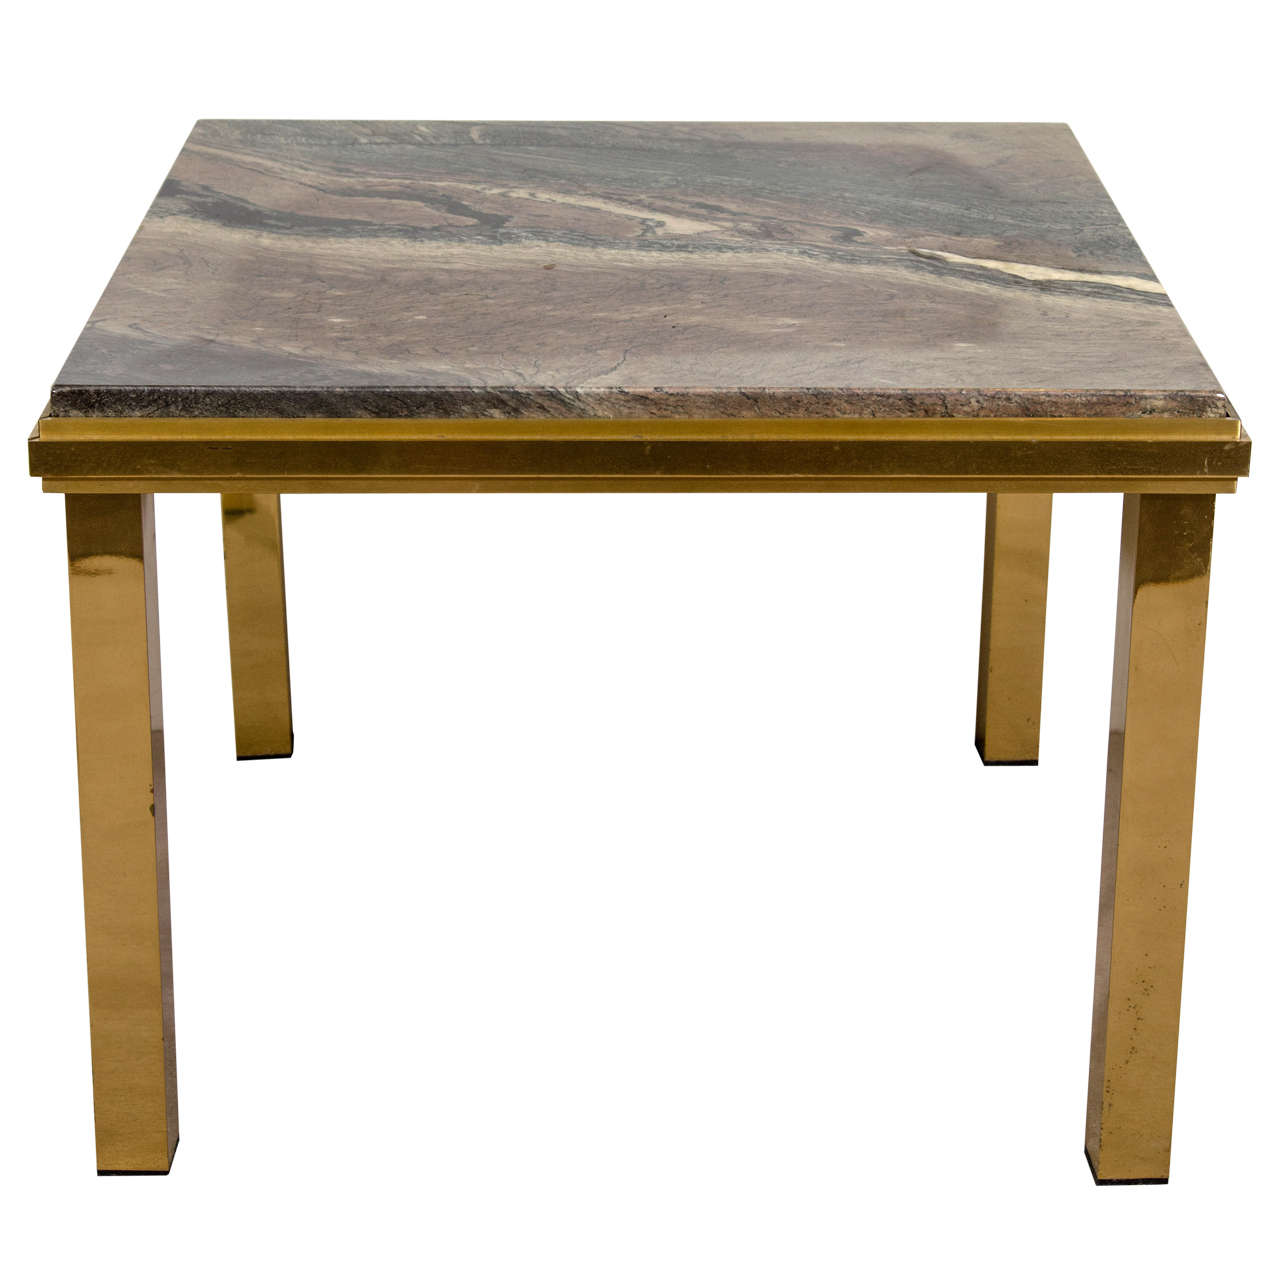 Italian Modern Brass and Marble End Table Willy Rizzo Style, circa 1970s For Sale 4